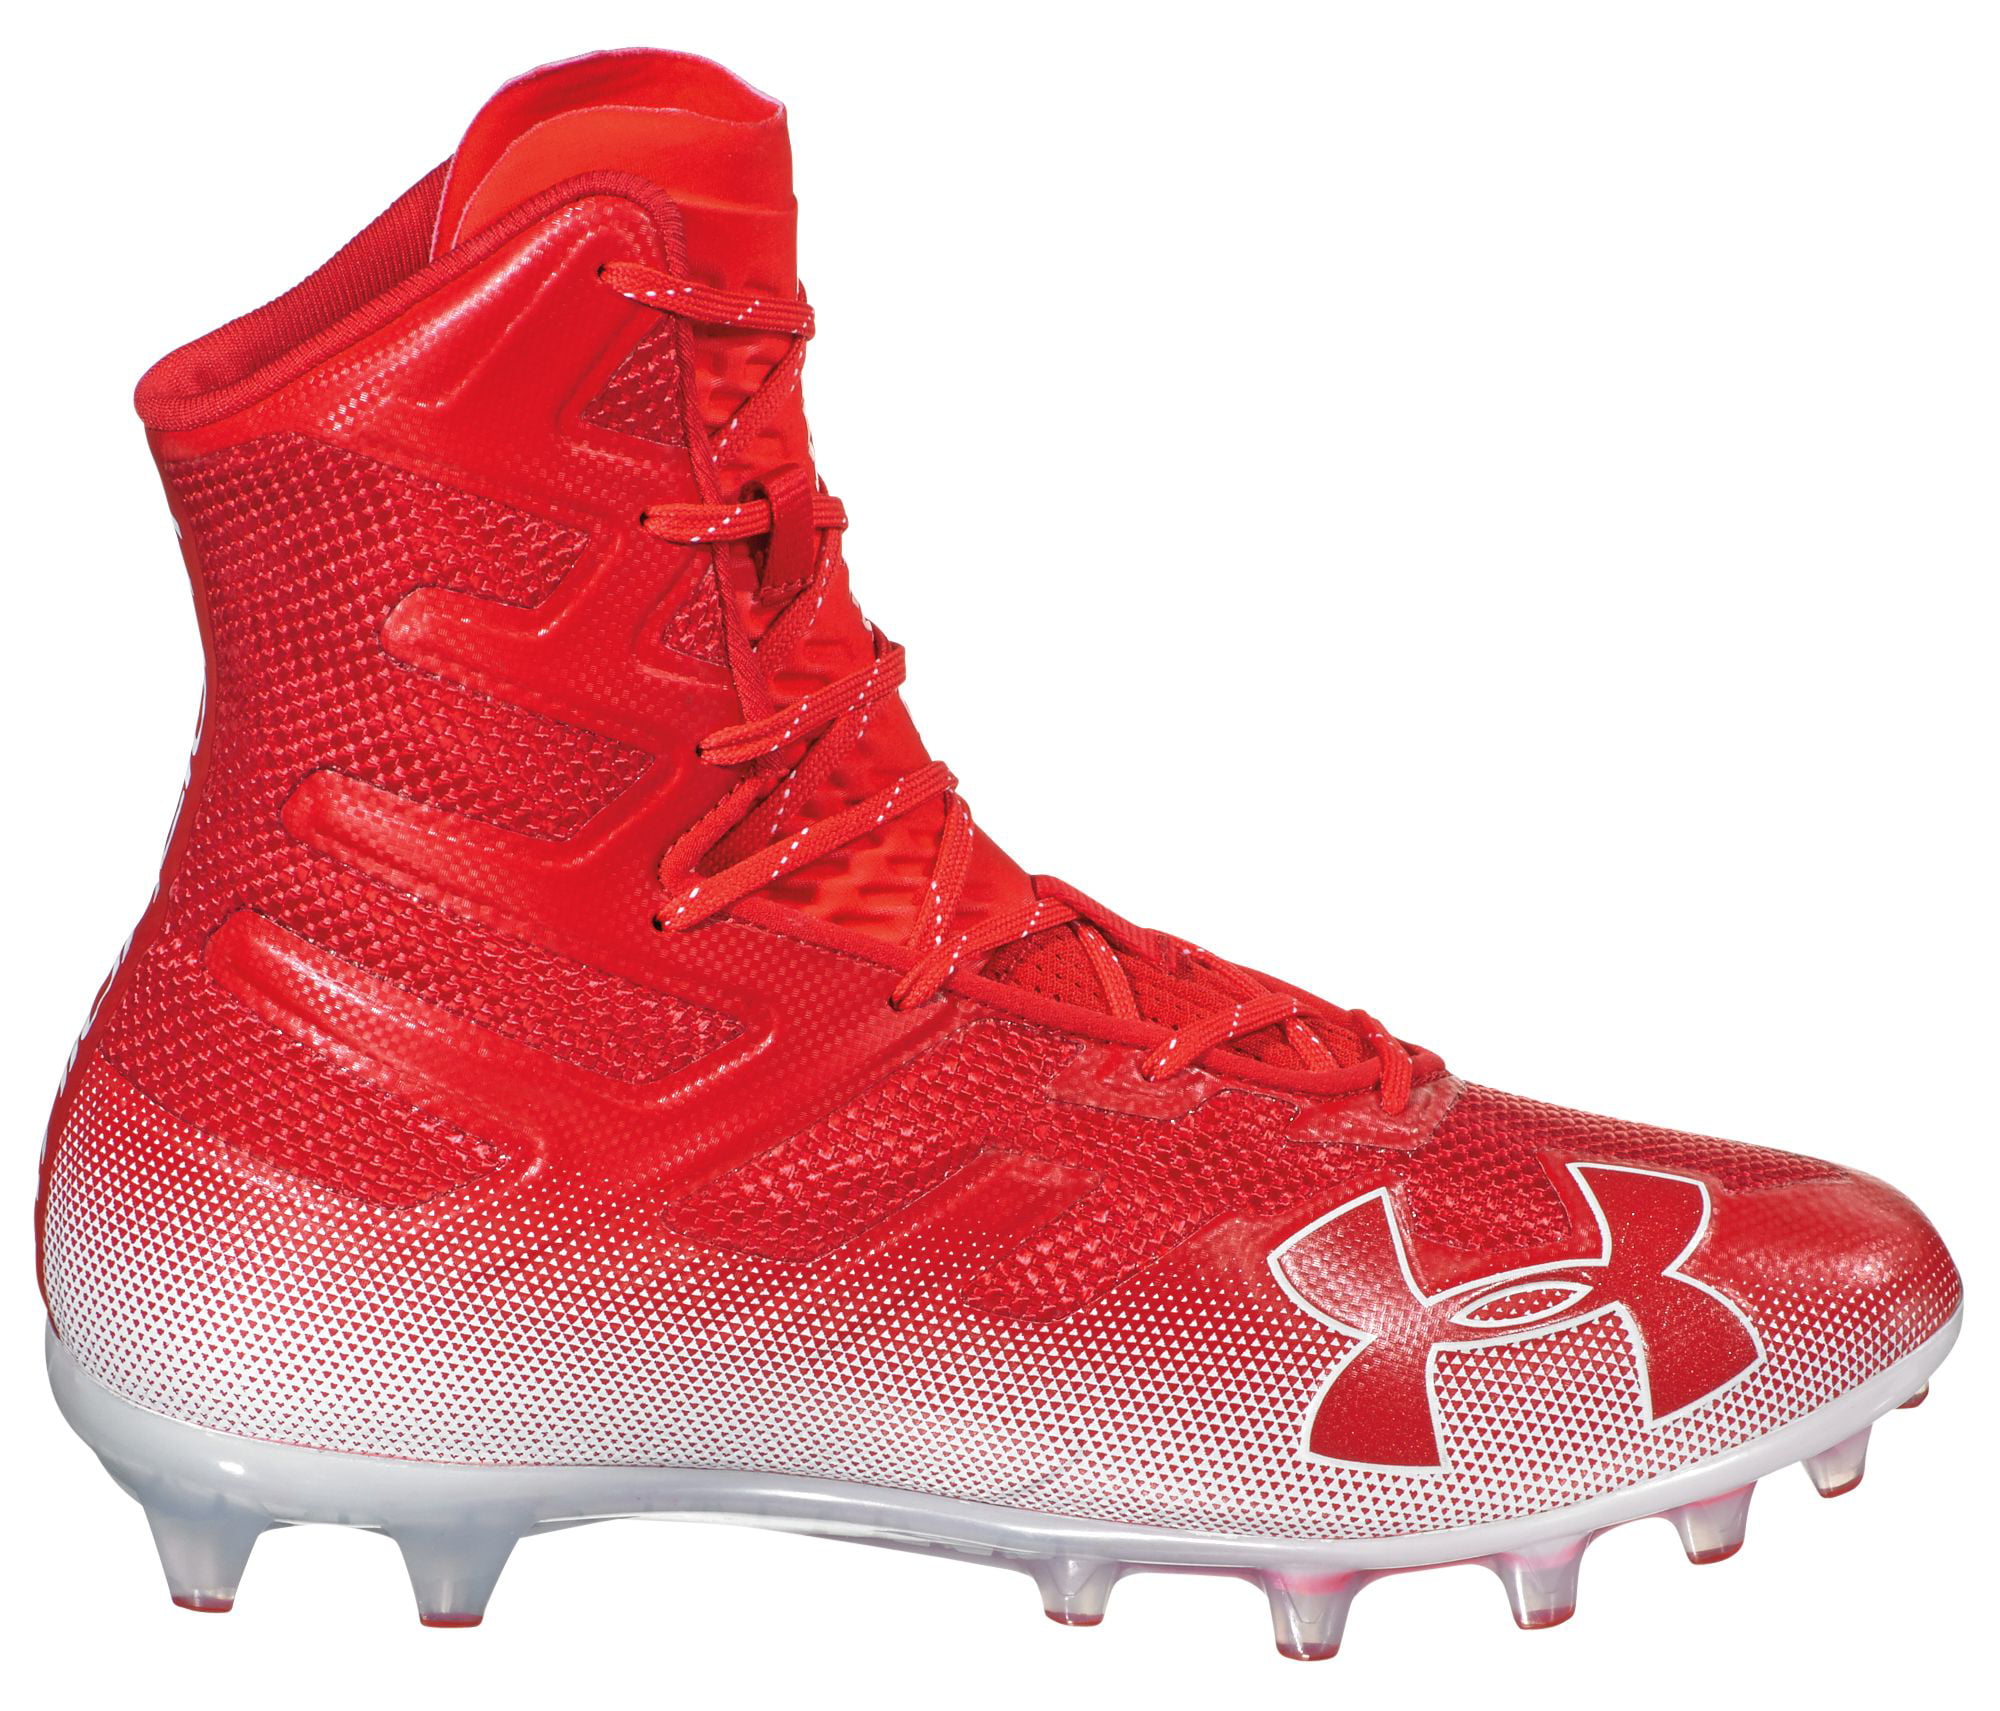 New Under Armour Highlight MC Lacrosse/Football Cleats Red/White Sz 9 M 